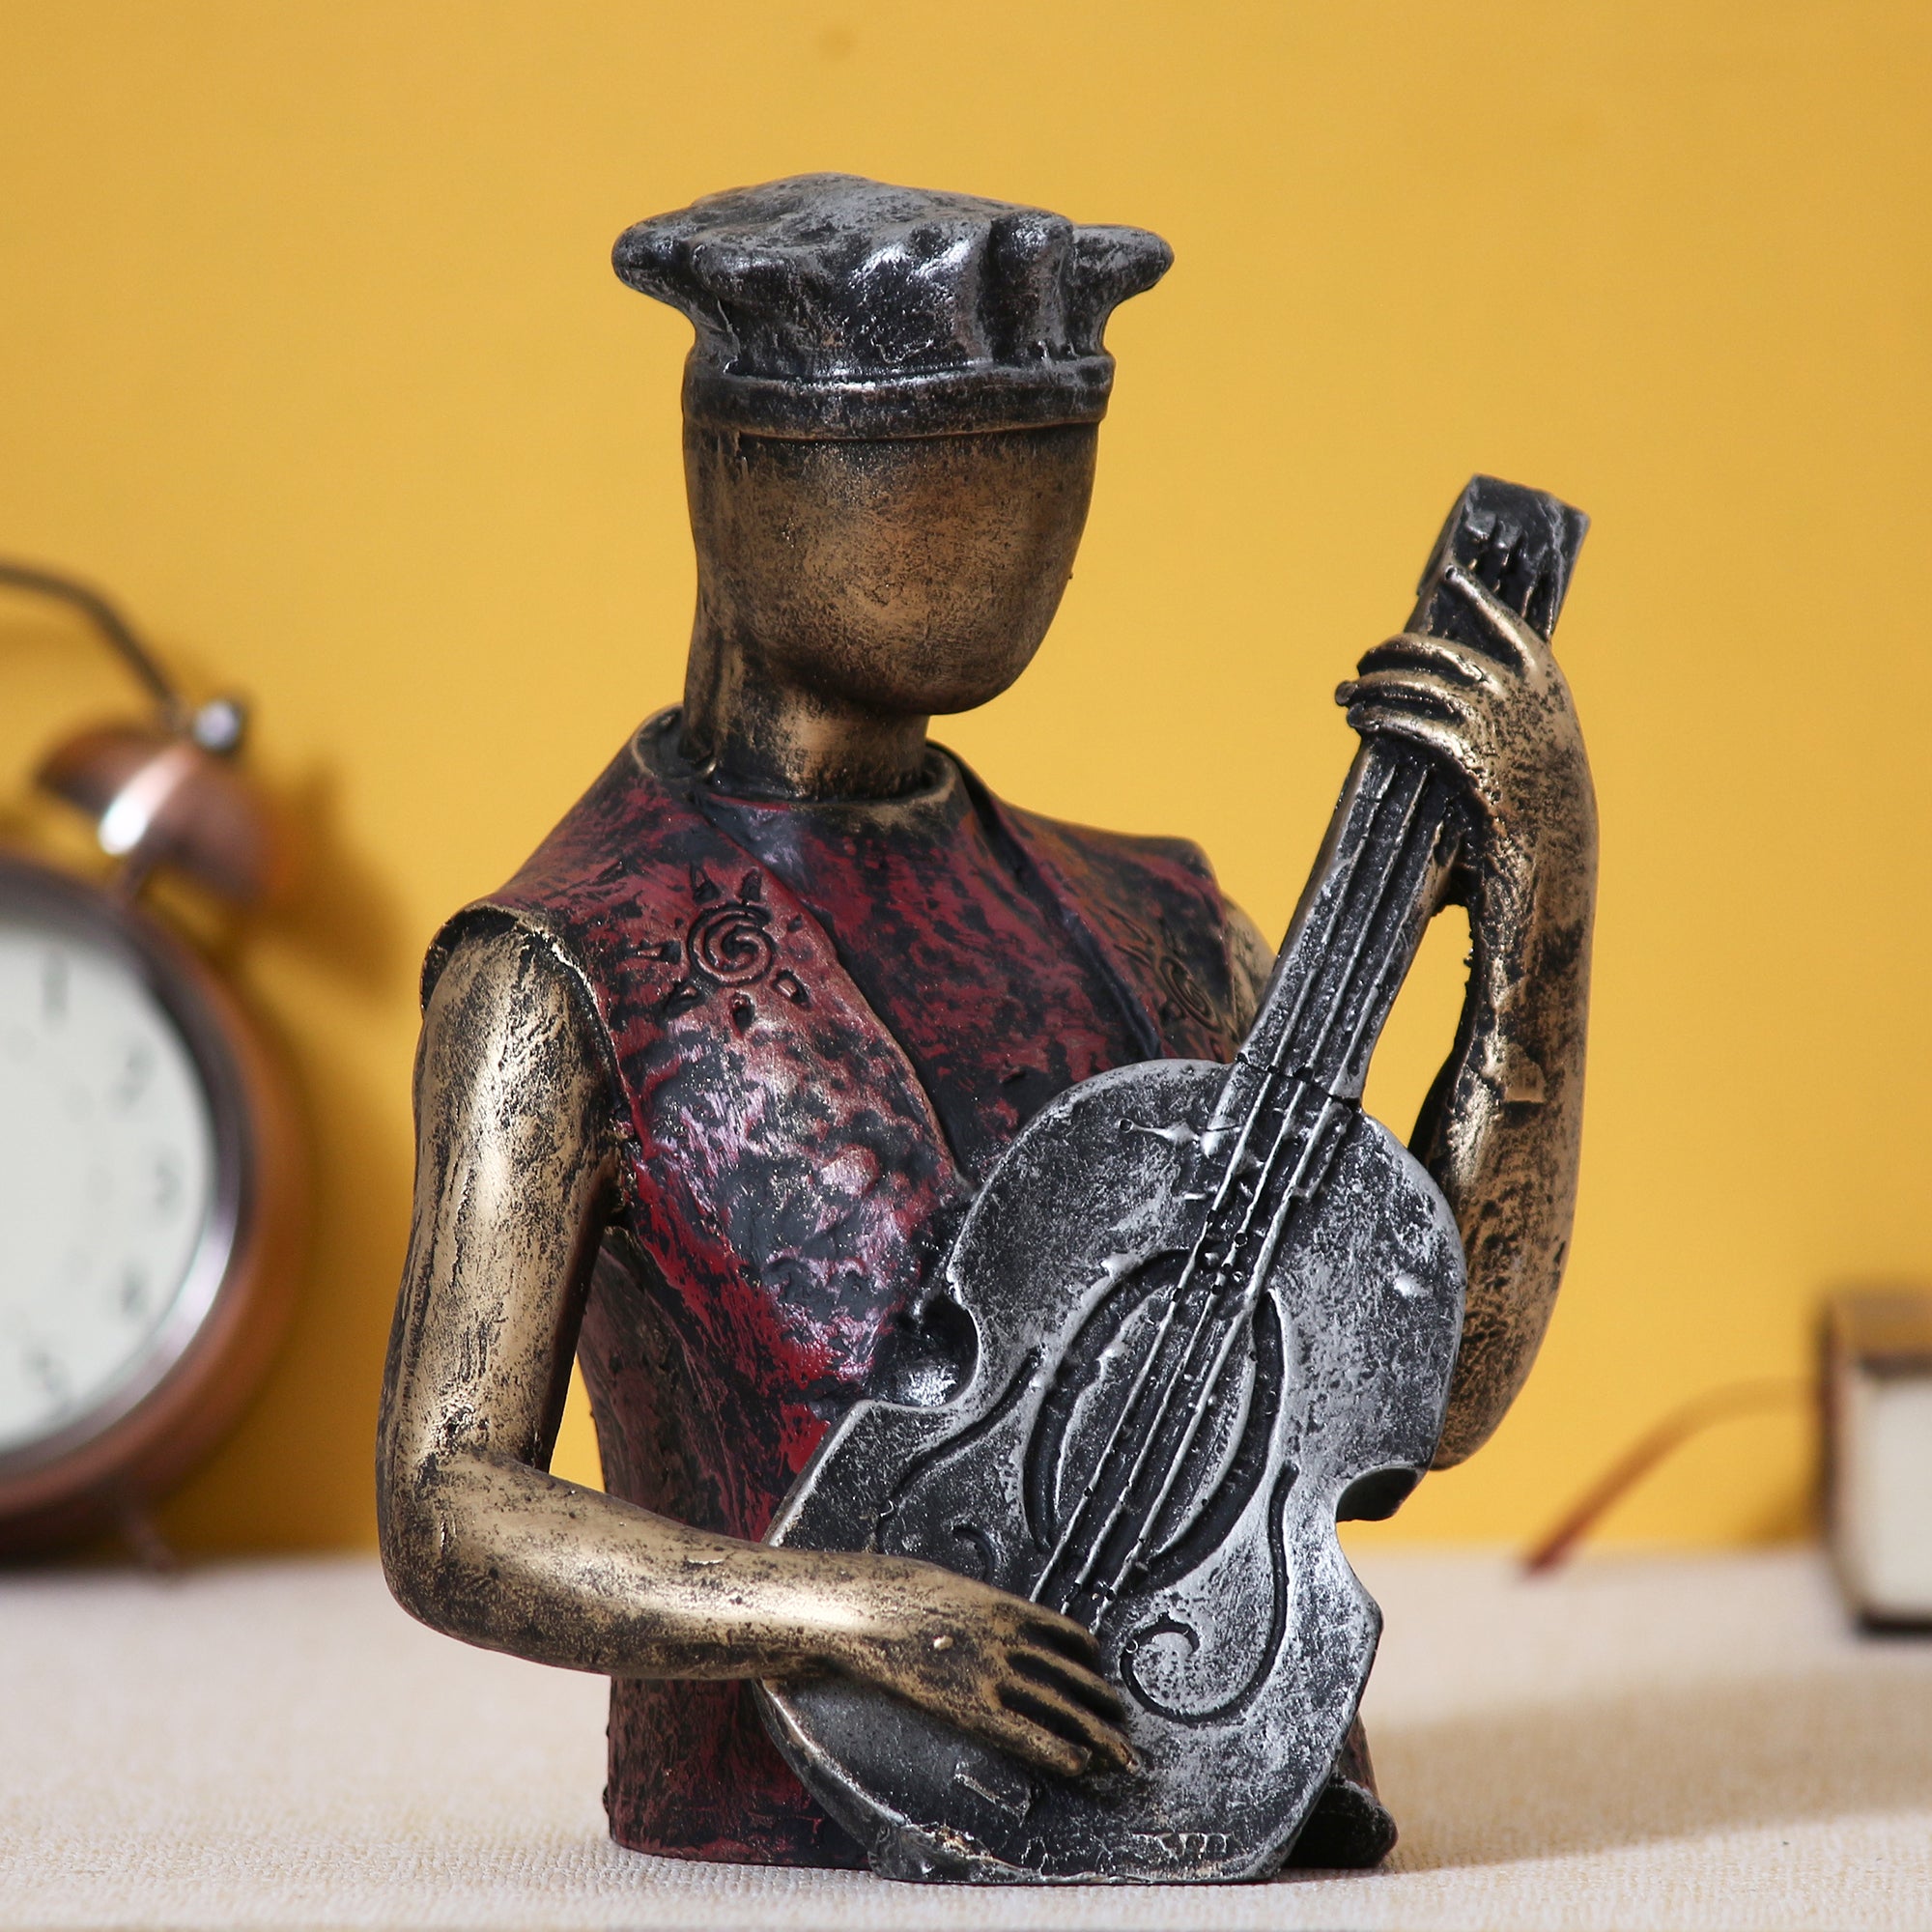 Man Figurine with Hat playing Guitar Musical Instrument (Brown, Silver and Golden)